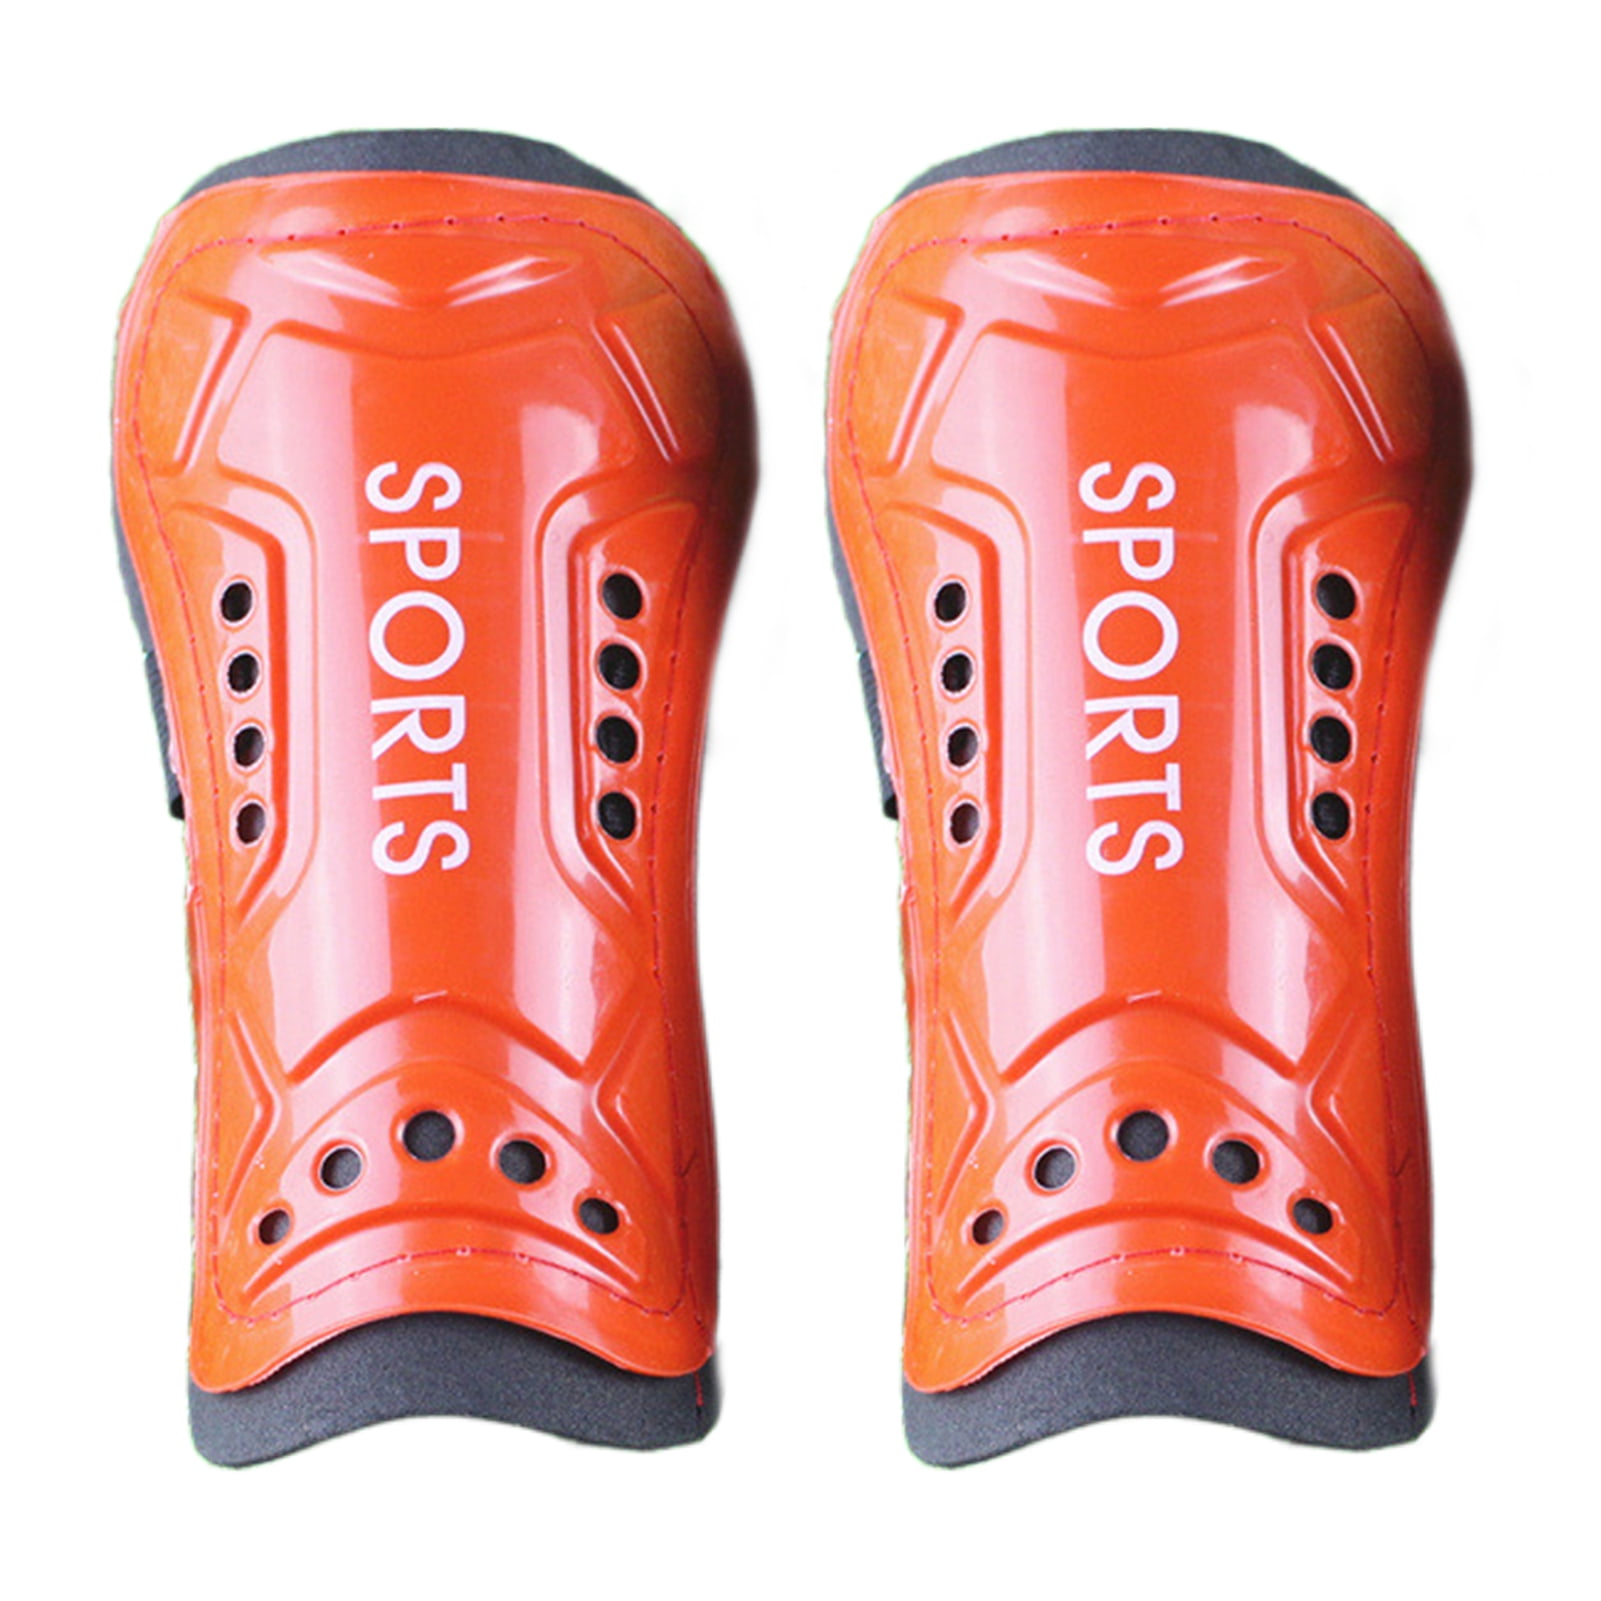 1PCS Football Shin Guards Protective Soccer Pads Holders Leg Sleeves  Basketball Training Sports Protector Gear Adult Teenager Color: red, Size:  L